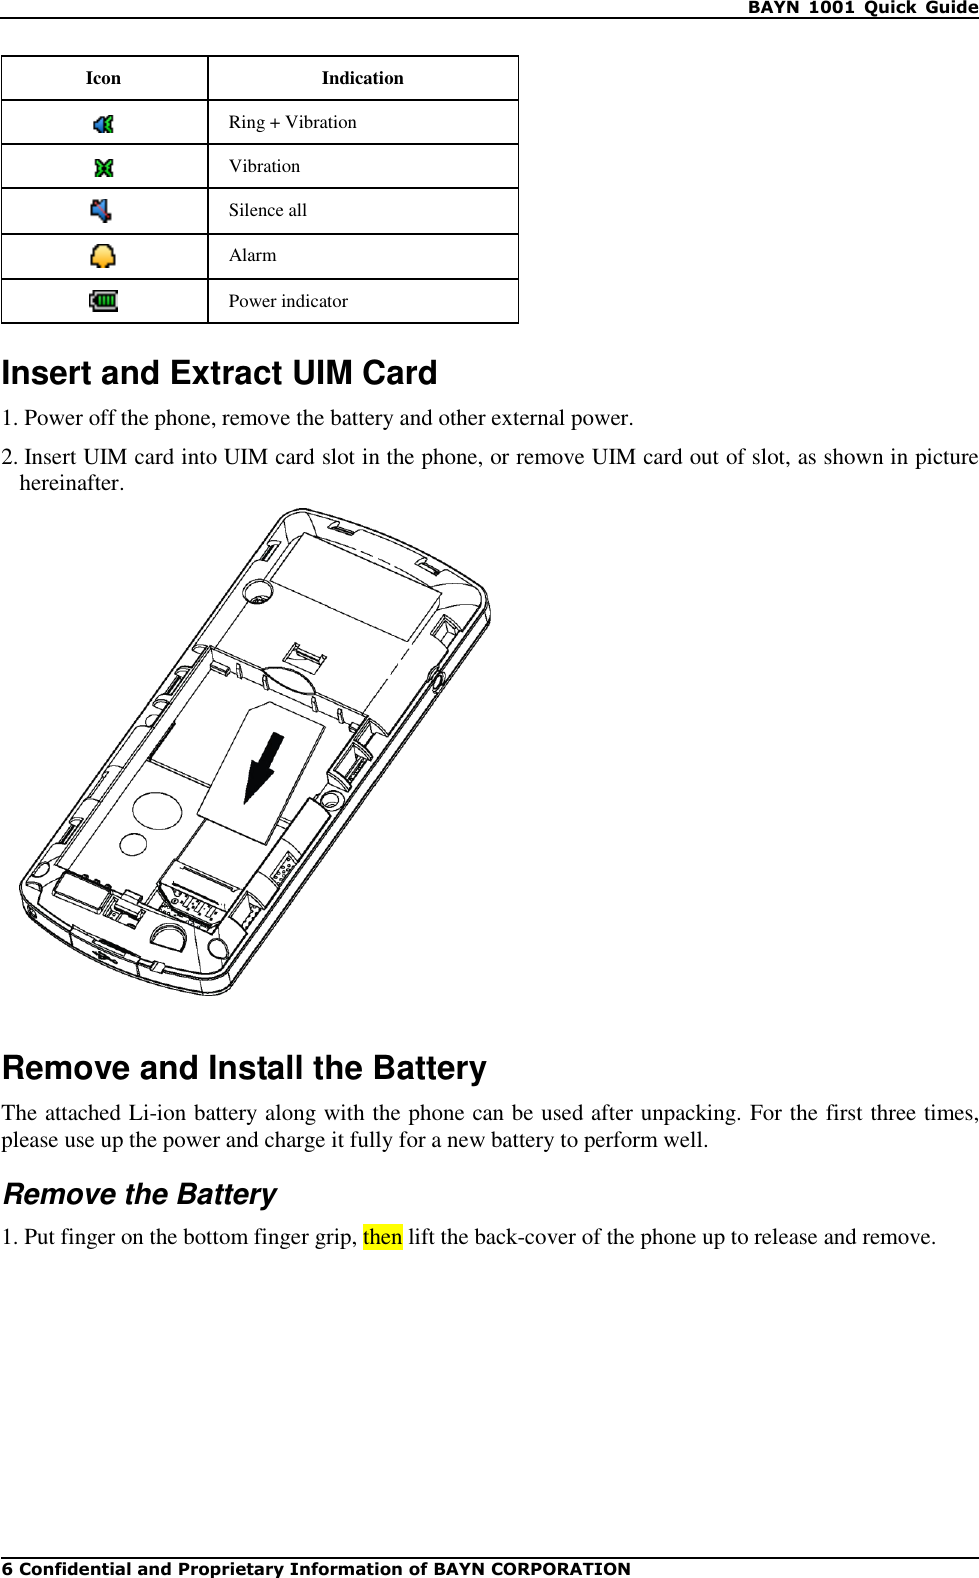    BAYN  1001  Quick  Guide 6 Confidential and Proprietary Information of BAYN CORPORATION Icon Indication  Ring + Vibration  Vibration  Silence all  Alarm  Power indicator  Insert and Extract UIM Card 1. Power off the phone, remove the battery and other external power. 2. Insert UIM card into UIM card slot in the phone, or remove UIM card out of slot, as shown in picture hereinafter.    Remove and Install the Battery The attached Li-ion battery along with the phone can be used after unpacking. For the first three times, please use up the power and charge it fully for a new battery to perform well. Remove the Battery 1. Put finger on the bottom finger grip, then lift the back-cover of the phone up to release and remove. 